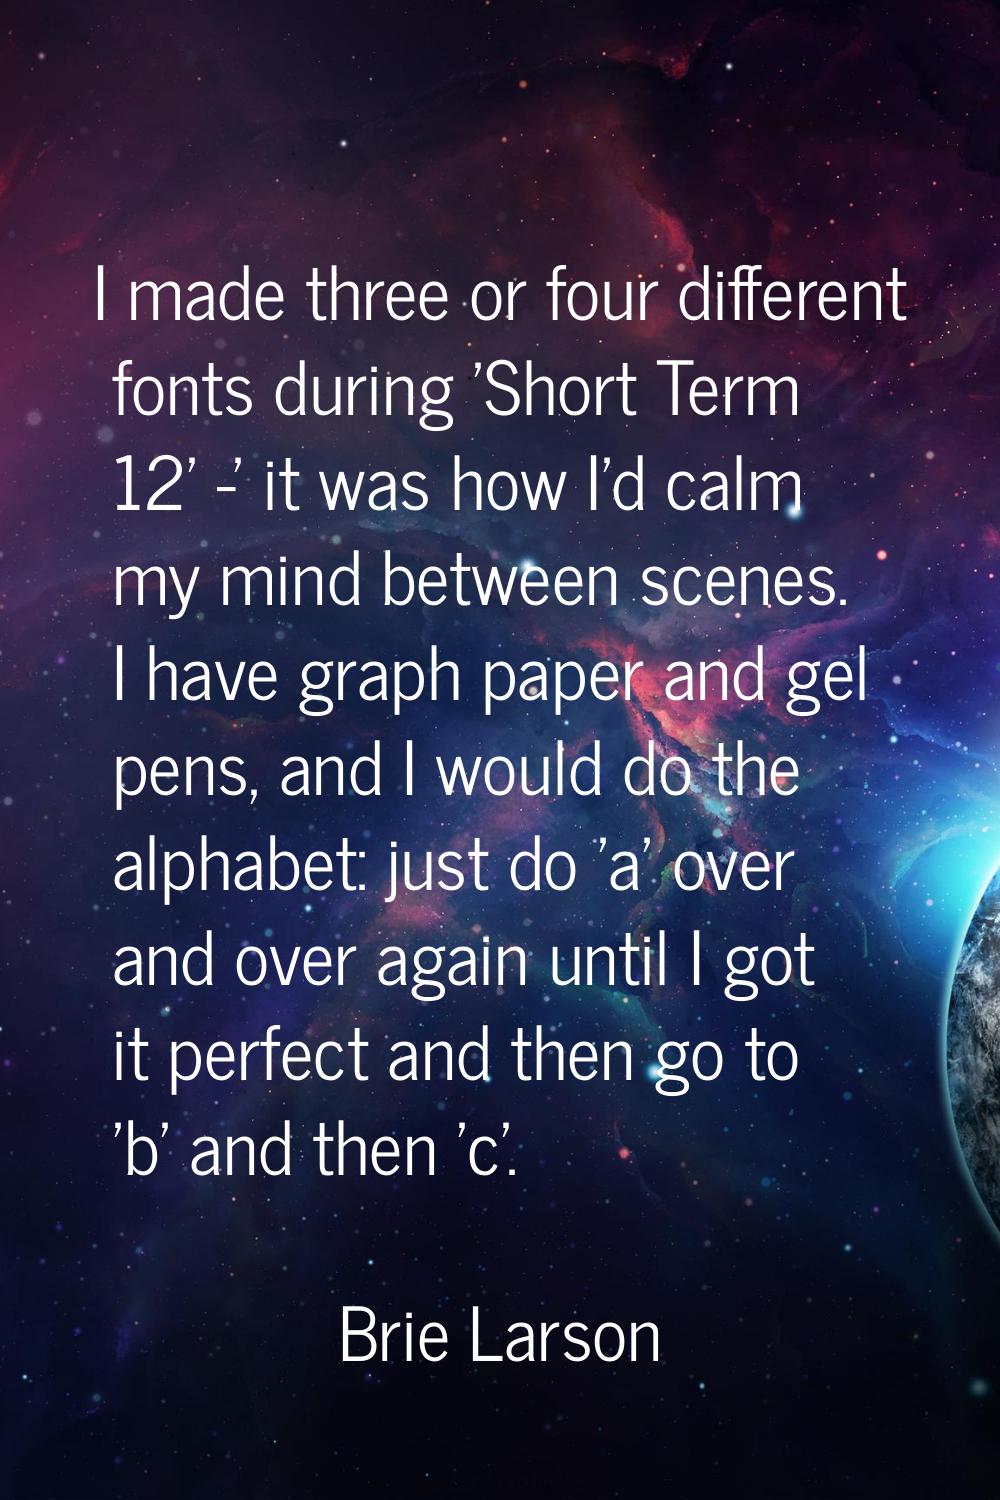 I made three or four different fonts during 'Short Term 12' -' it was how I'd calm my mind between 